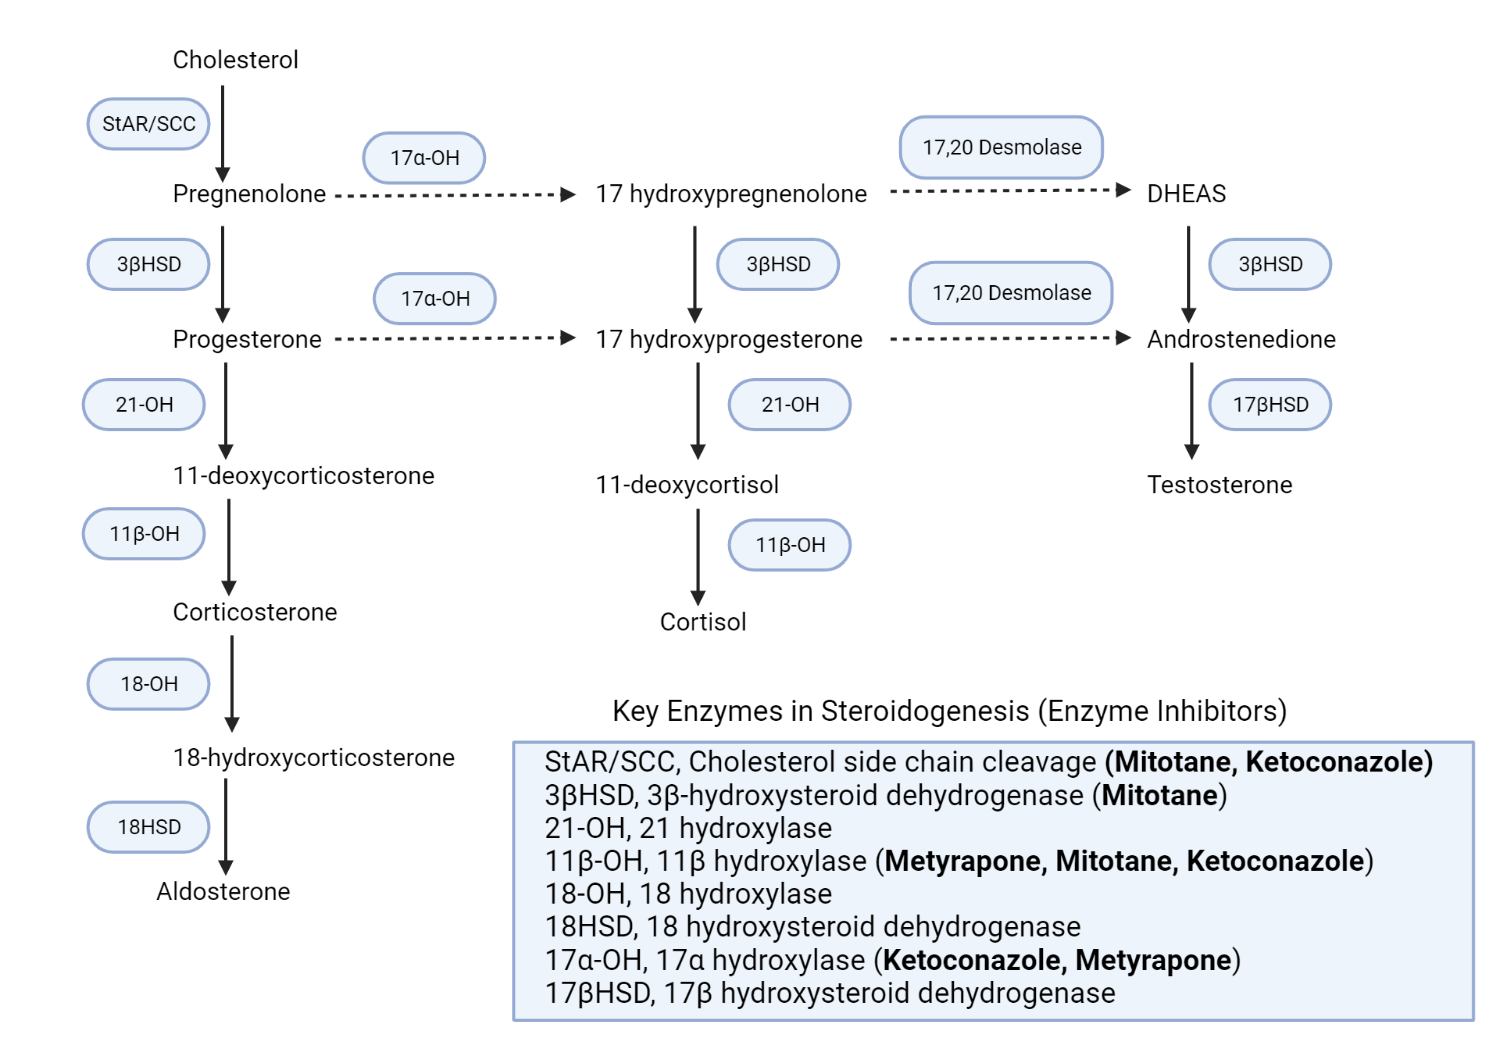 Schematic representation of the adrenal steroidogenesis pathways and the site of action of various enzyme inhibitors. 